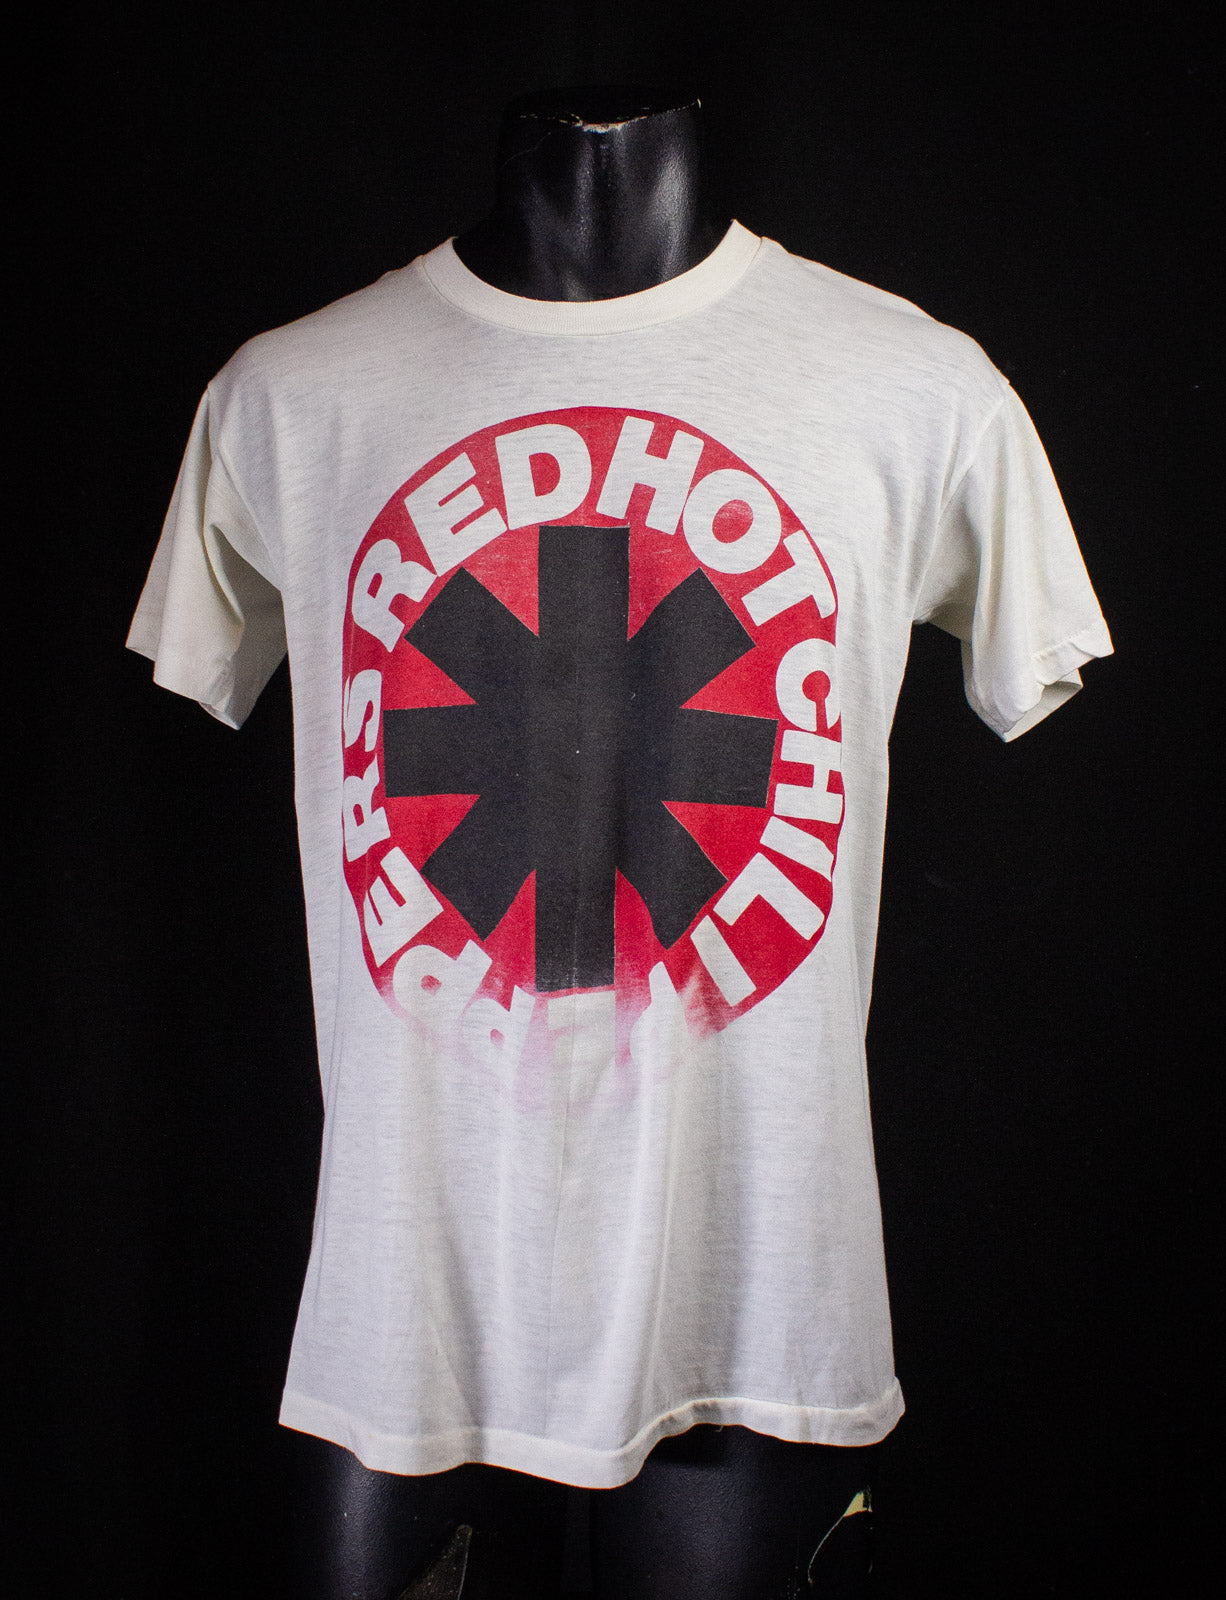 Vintage Red Hot Chili Peppers Logo Concert T Shirt 80s White Medium